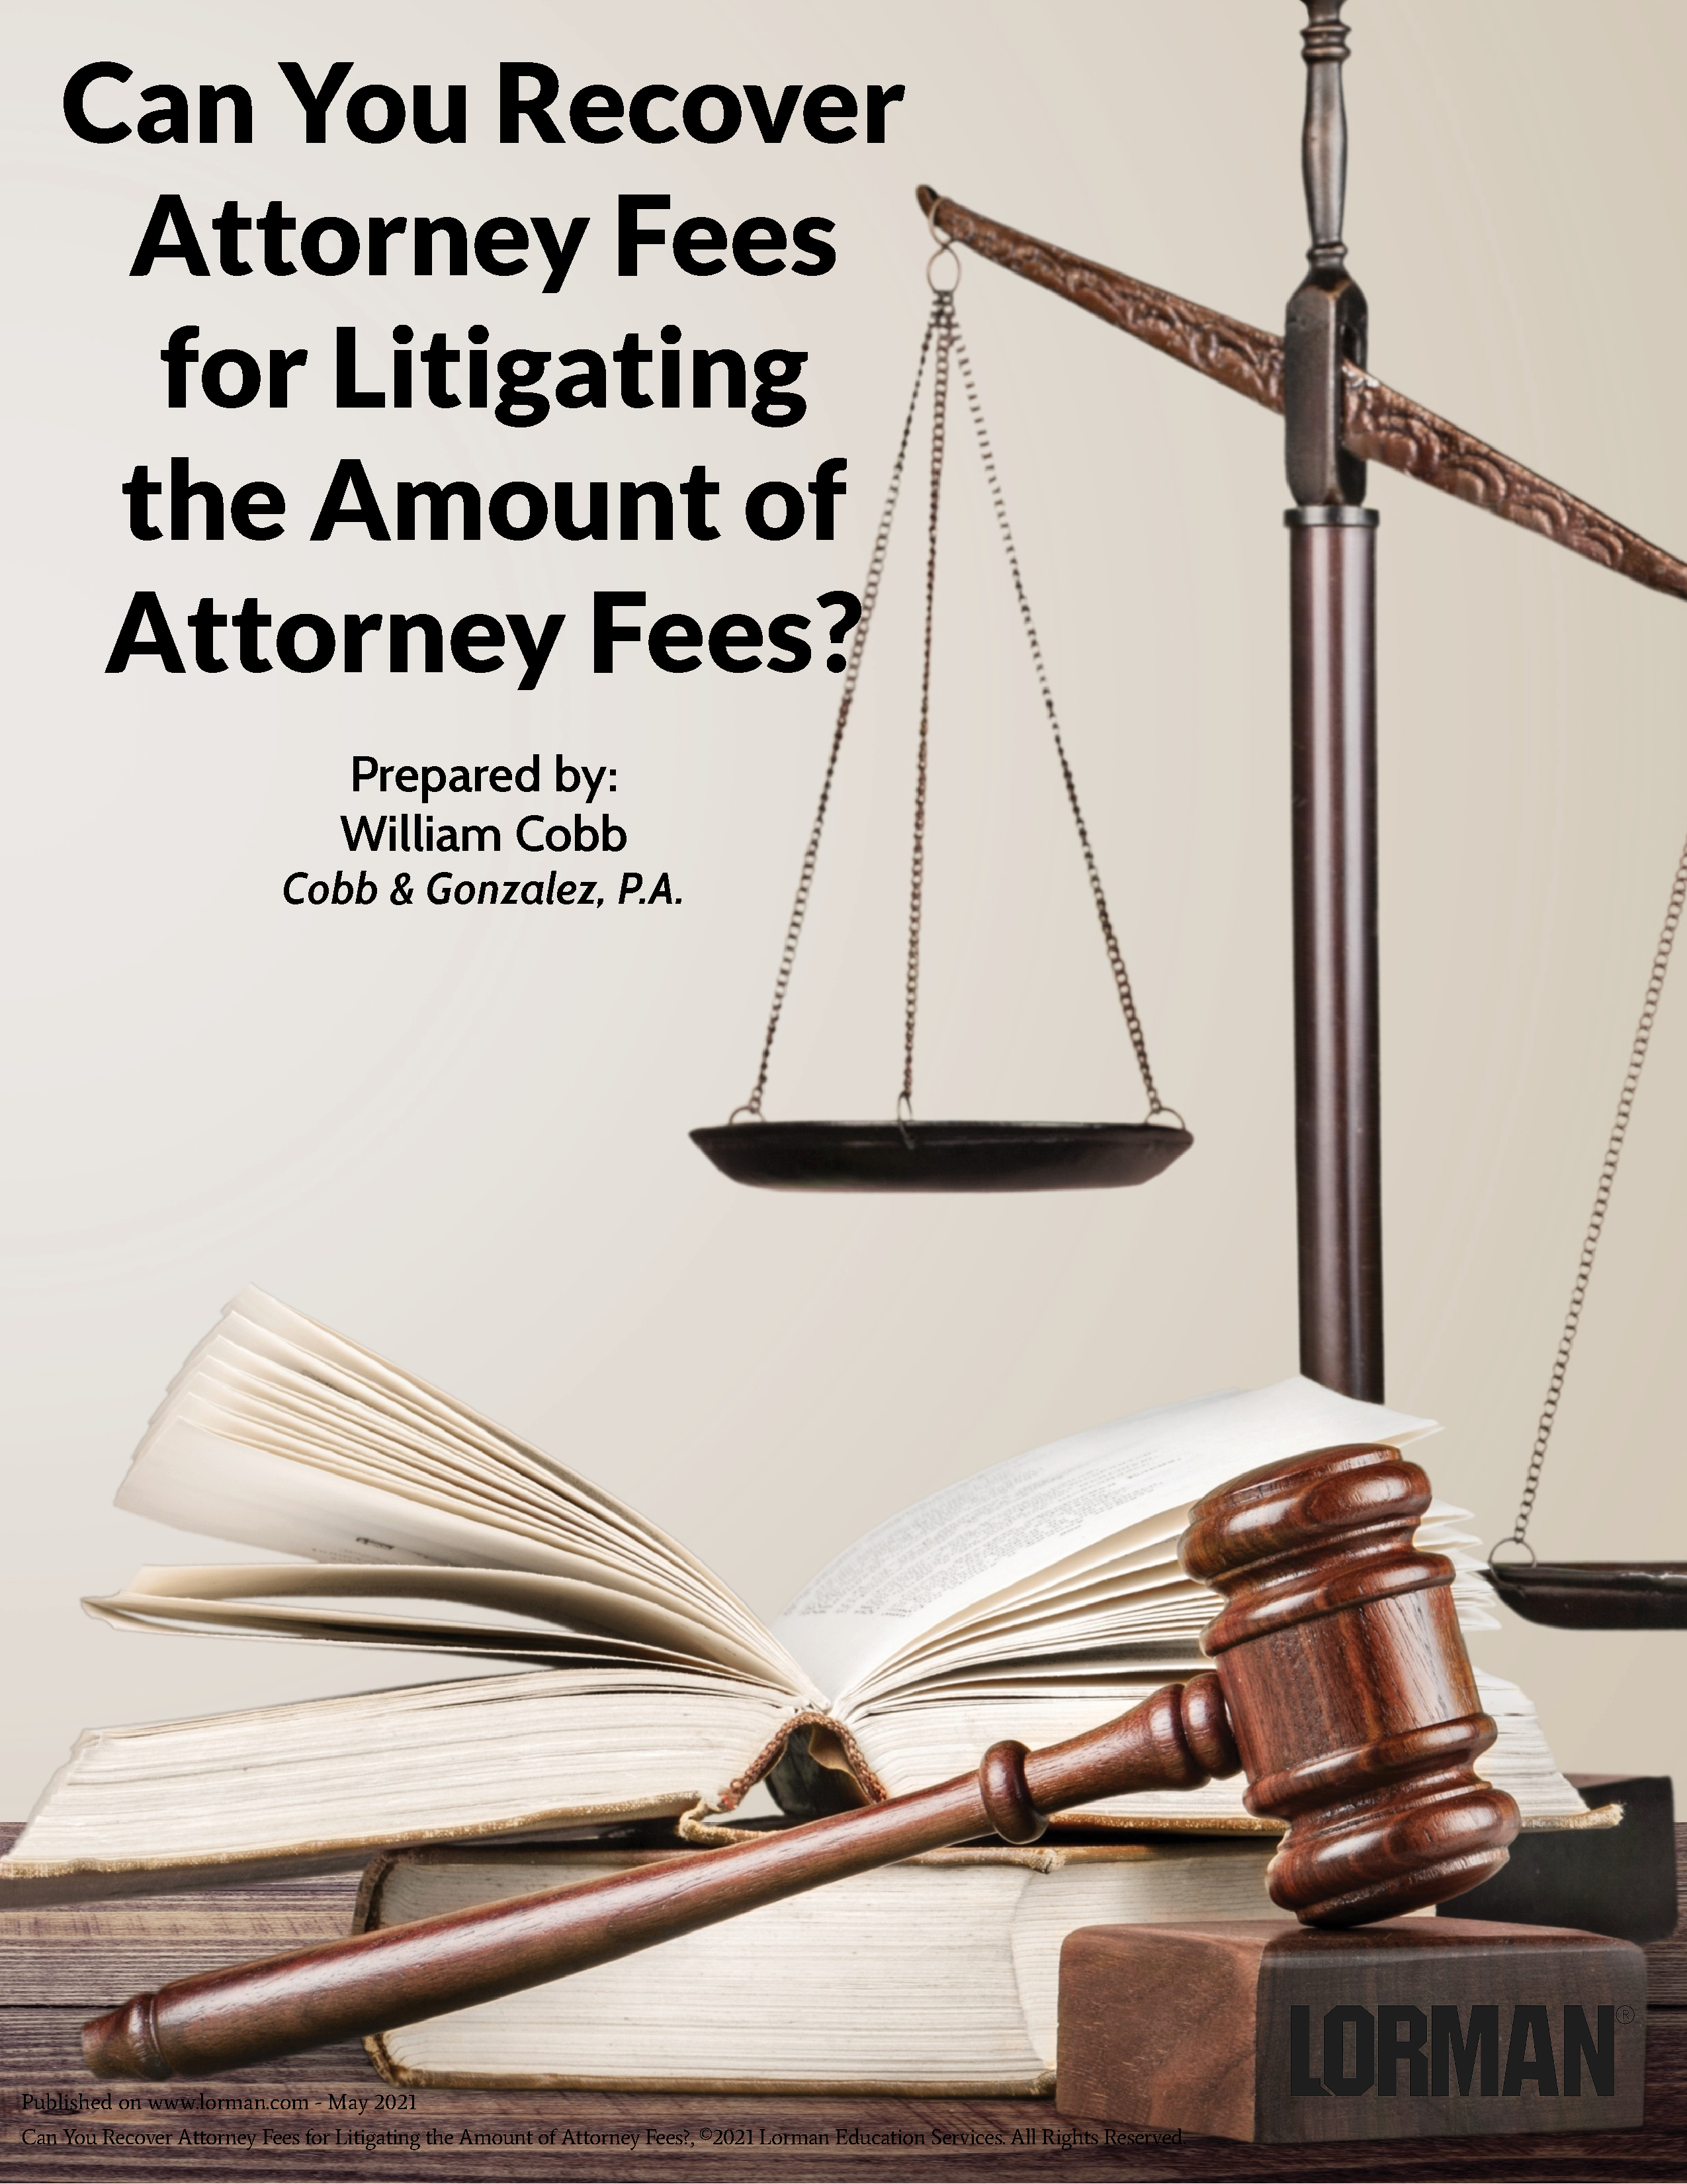 Can You Recover Attorney Fees For Litigating The Amount Of Attorney Fees?